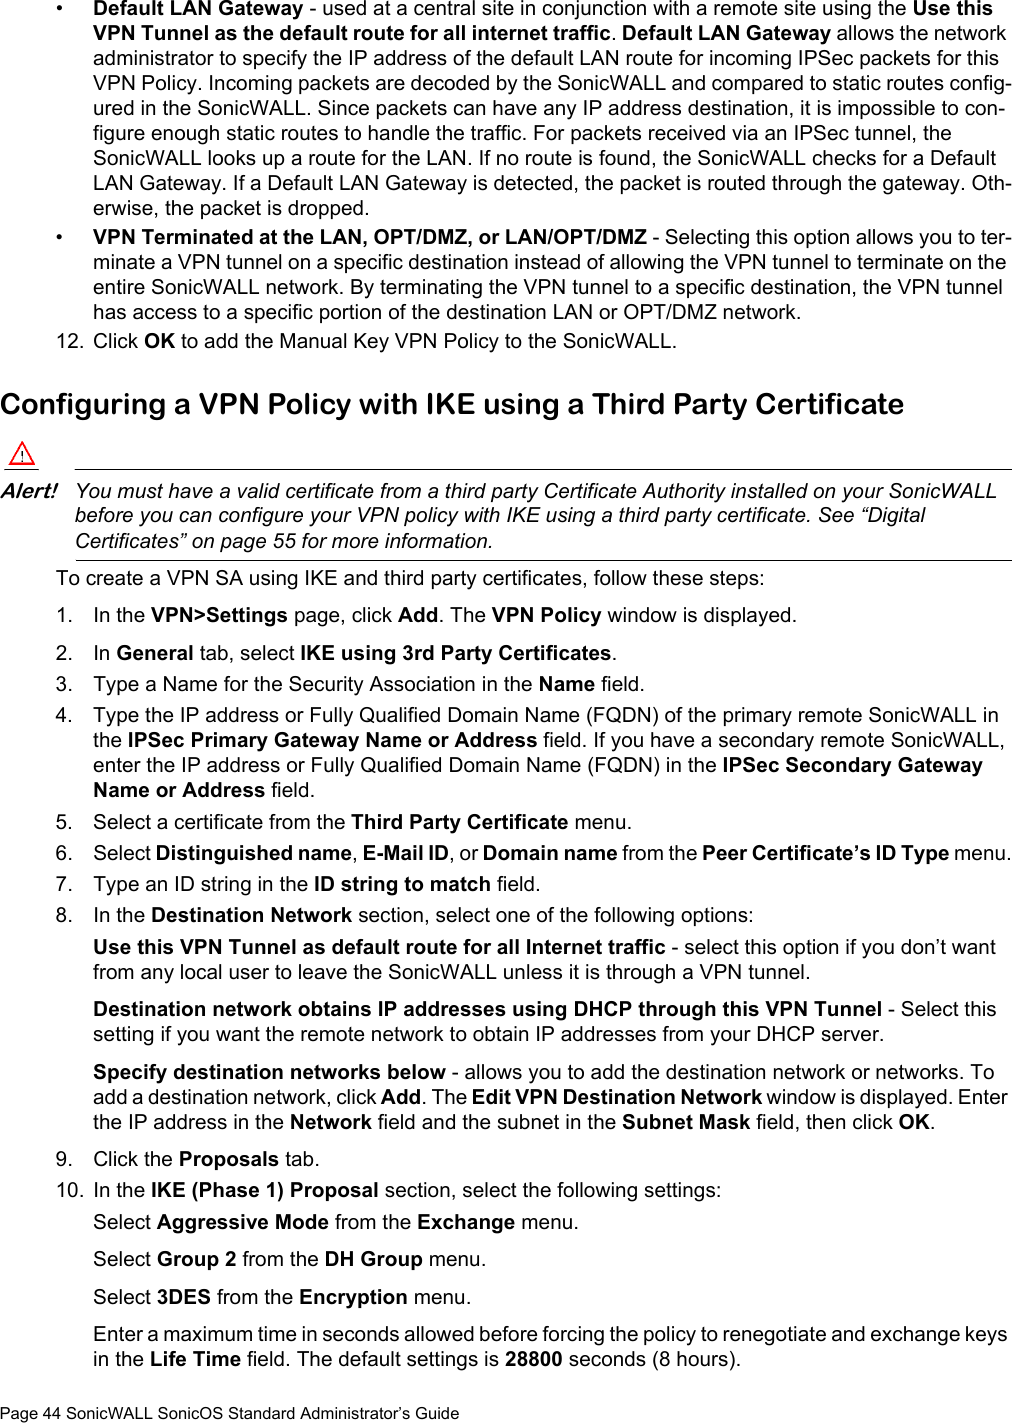 Page 44 SonicWALL SonicOS Standard Administrator’s Guide•Default LAN Gateway - used at a central site in conjunction with a remote site using the Use this VPN Tunnel as the default route for all internet traffic. Default LAN Gateway allows the network administrator to specify the IP address of the default LAN route for incoming IPSec packets for this VPN Policy. Incoming packets are decoded by the SonicWALL and compared to static routes config-ured in the SonicWALL. Since packets can have any IP address destination, it is impossible to con-figure enough static routes to handle the traffic. For packets received via an IPSec tunnel, the SonicWALL looks up a route for the LAN. If no route is found, the SonicWALL checks for a Default LAN Gateway. If a Default LAN Gateway is detected, the packet is routed through the gateway. Oth-erwise, the packet is dropped. •VPN Terminated at the LAN, OPT/DMZ, or LAN/OPT/DMZ - Selecting this option allows you to ter-minate a VPN tunnel on a specific destination instead of allowing the VPN tunnel to terminate on the entire SonicWALL network. By terminating the VPN tunnel to a specific destination, the VPN tunnel has access to a specific portion of the destination LAN or OPT/DMZ network.12. Click OK to add the Manual Key VPN Policy to the SonicWALL. Configuring a VPN Policy with IKE using a Third Party CertificateAlert!You must have a valid certificate from a third party Certificate Authority installed on your SonicWALL before you can configure your VPN policy with IKE using a third party certificate. See “Digital Certificates” on page 55 for more information.To create a VPN SA using IKE and third party certificates, follow these steps:1. In the VPN&gt;Settings page, click Add. The VPN Policy window is displayed.2. In General tab, select IKE using 3rd Party Certificates.3. Type a Name for the Security Association in the Name field. 4. Type the IP address or Fully Qualified Domain Name (FQDN) of the primary remote SonicWALL in the IPSec Primary Gateway Name or Address field. If you have a secondary remote SonicWALL, enter the IP address or Fully Qualified Domain Name (FQDN) in the IPSec Secondary Gateway Name or Address field.5. Select a certificate from the Third Party Certificate menu. 6. Select Distinguished name, E-Mail ID, or Domain name from the Peer Certificate’s ID Type menu.7. Type an ID string in the ID string to match field.8. In the Destination Network section, select one of the following options:Use this VPN Tunnel as default route for all Internet traffic - select this option if you don’t want from any local user to leave the SonicWALL unless it is through a VPN tunnel.Destination network obtains IP addresses using DHCP through this VPN Tunnel - Select this setting if you want the remote network to obtain IP addresses from your DHCP server.Specify destination networks below - allows you to add the destination network or networks. To add a destination network, click Add. The Edit VPN Destination Network window is displayed. Enter the IP address in the Network field and the subnet in the Subnet Mask field, then click OK.9. Click the Proposals tab.10. In the IKE (Phase 1) Proposal section, select the following settings:Select Aggressive Mode from the Exchange menu.Select Group 2 from the DH Group menu.Select 3DES from the Encryption menu.Enter a maximum time in seconds allowed before forcing the policy to renegotiate and exchange keys in the Life Time field. The default settings is 28800 seconds (8 hours).